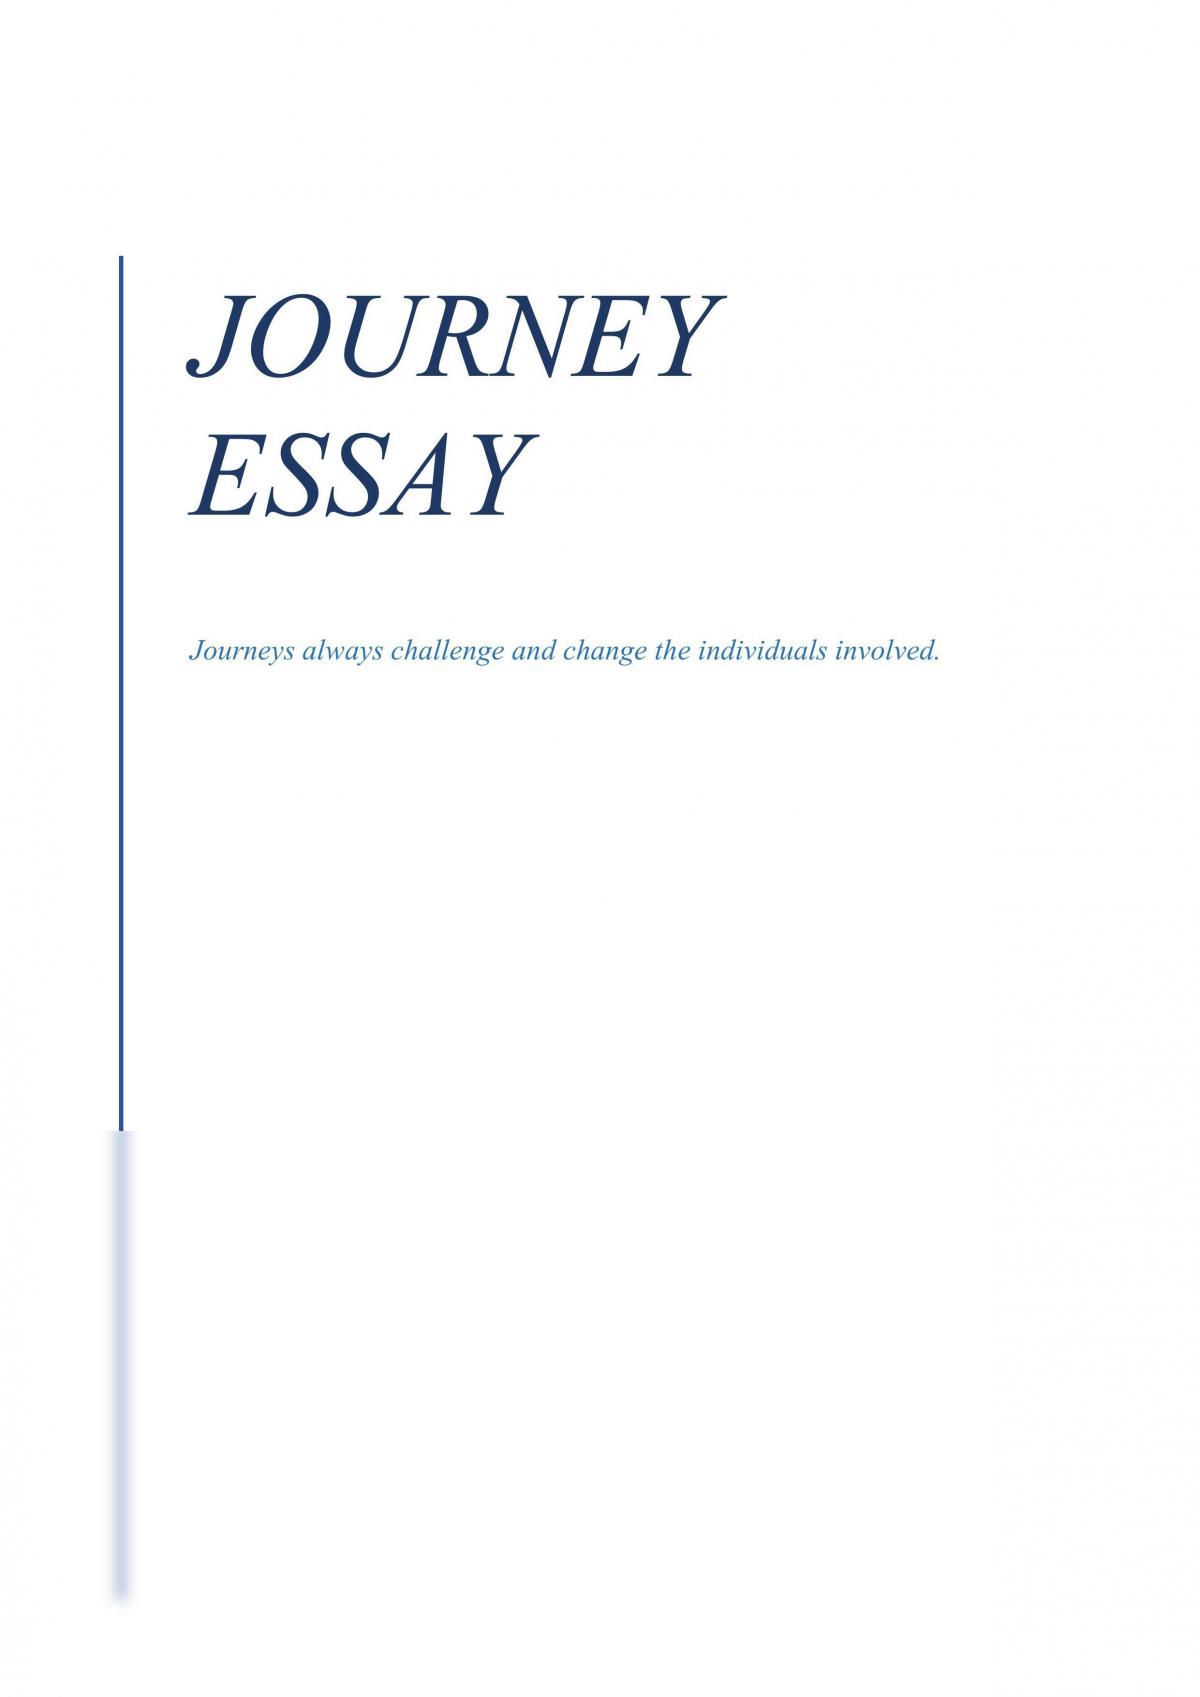 essay title for journey